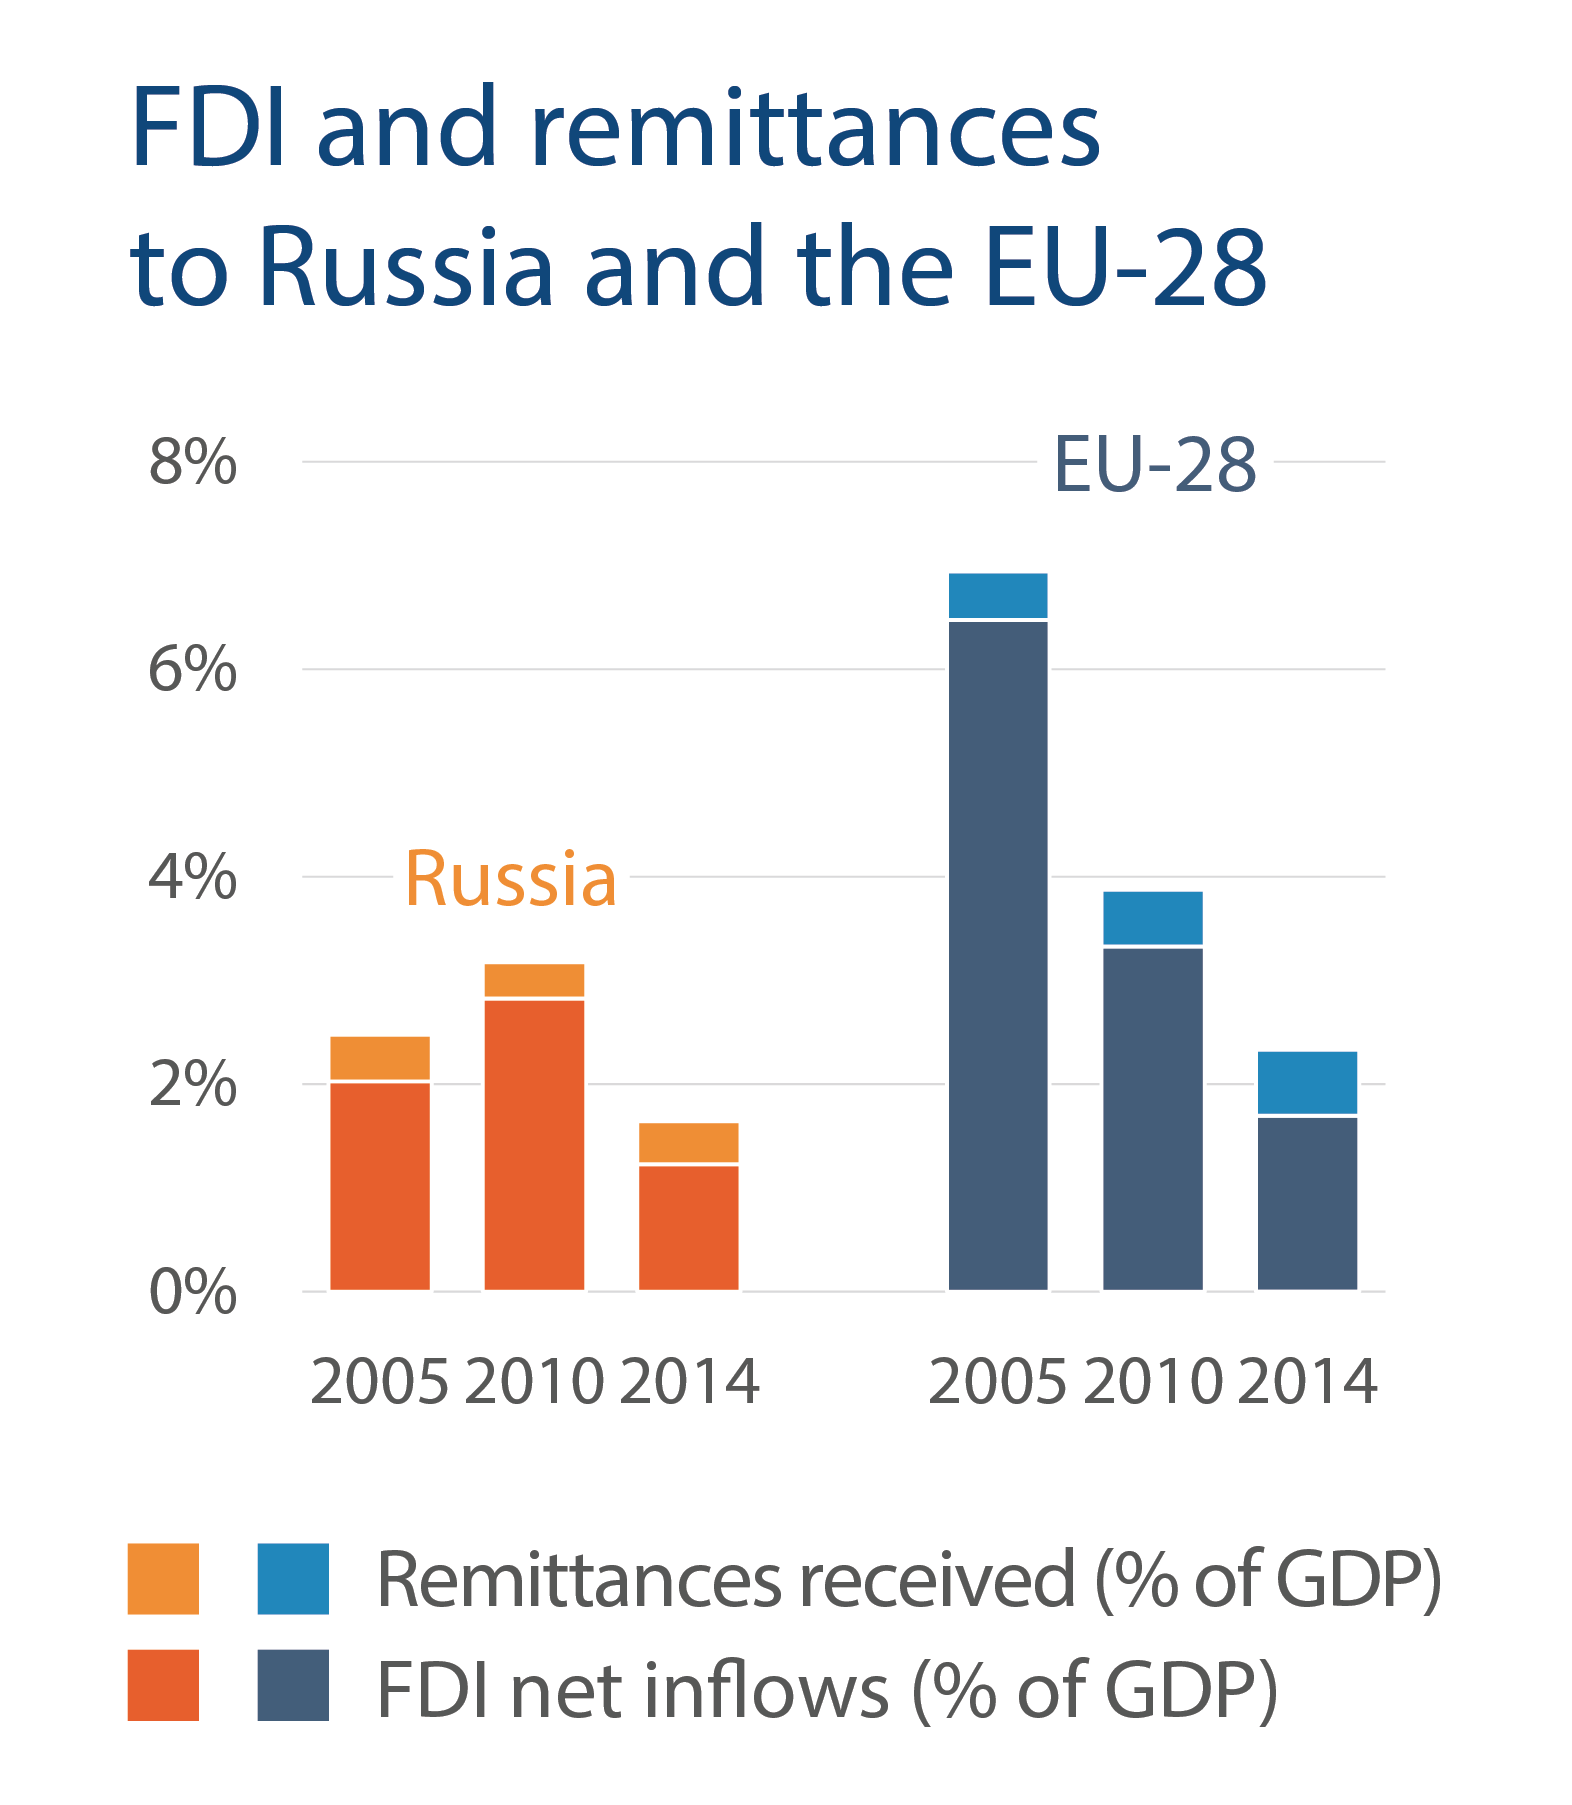 FDI and remittances to Russia and the EU-28